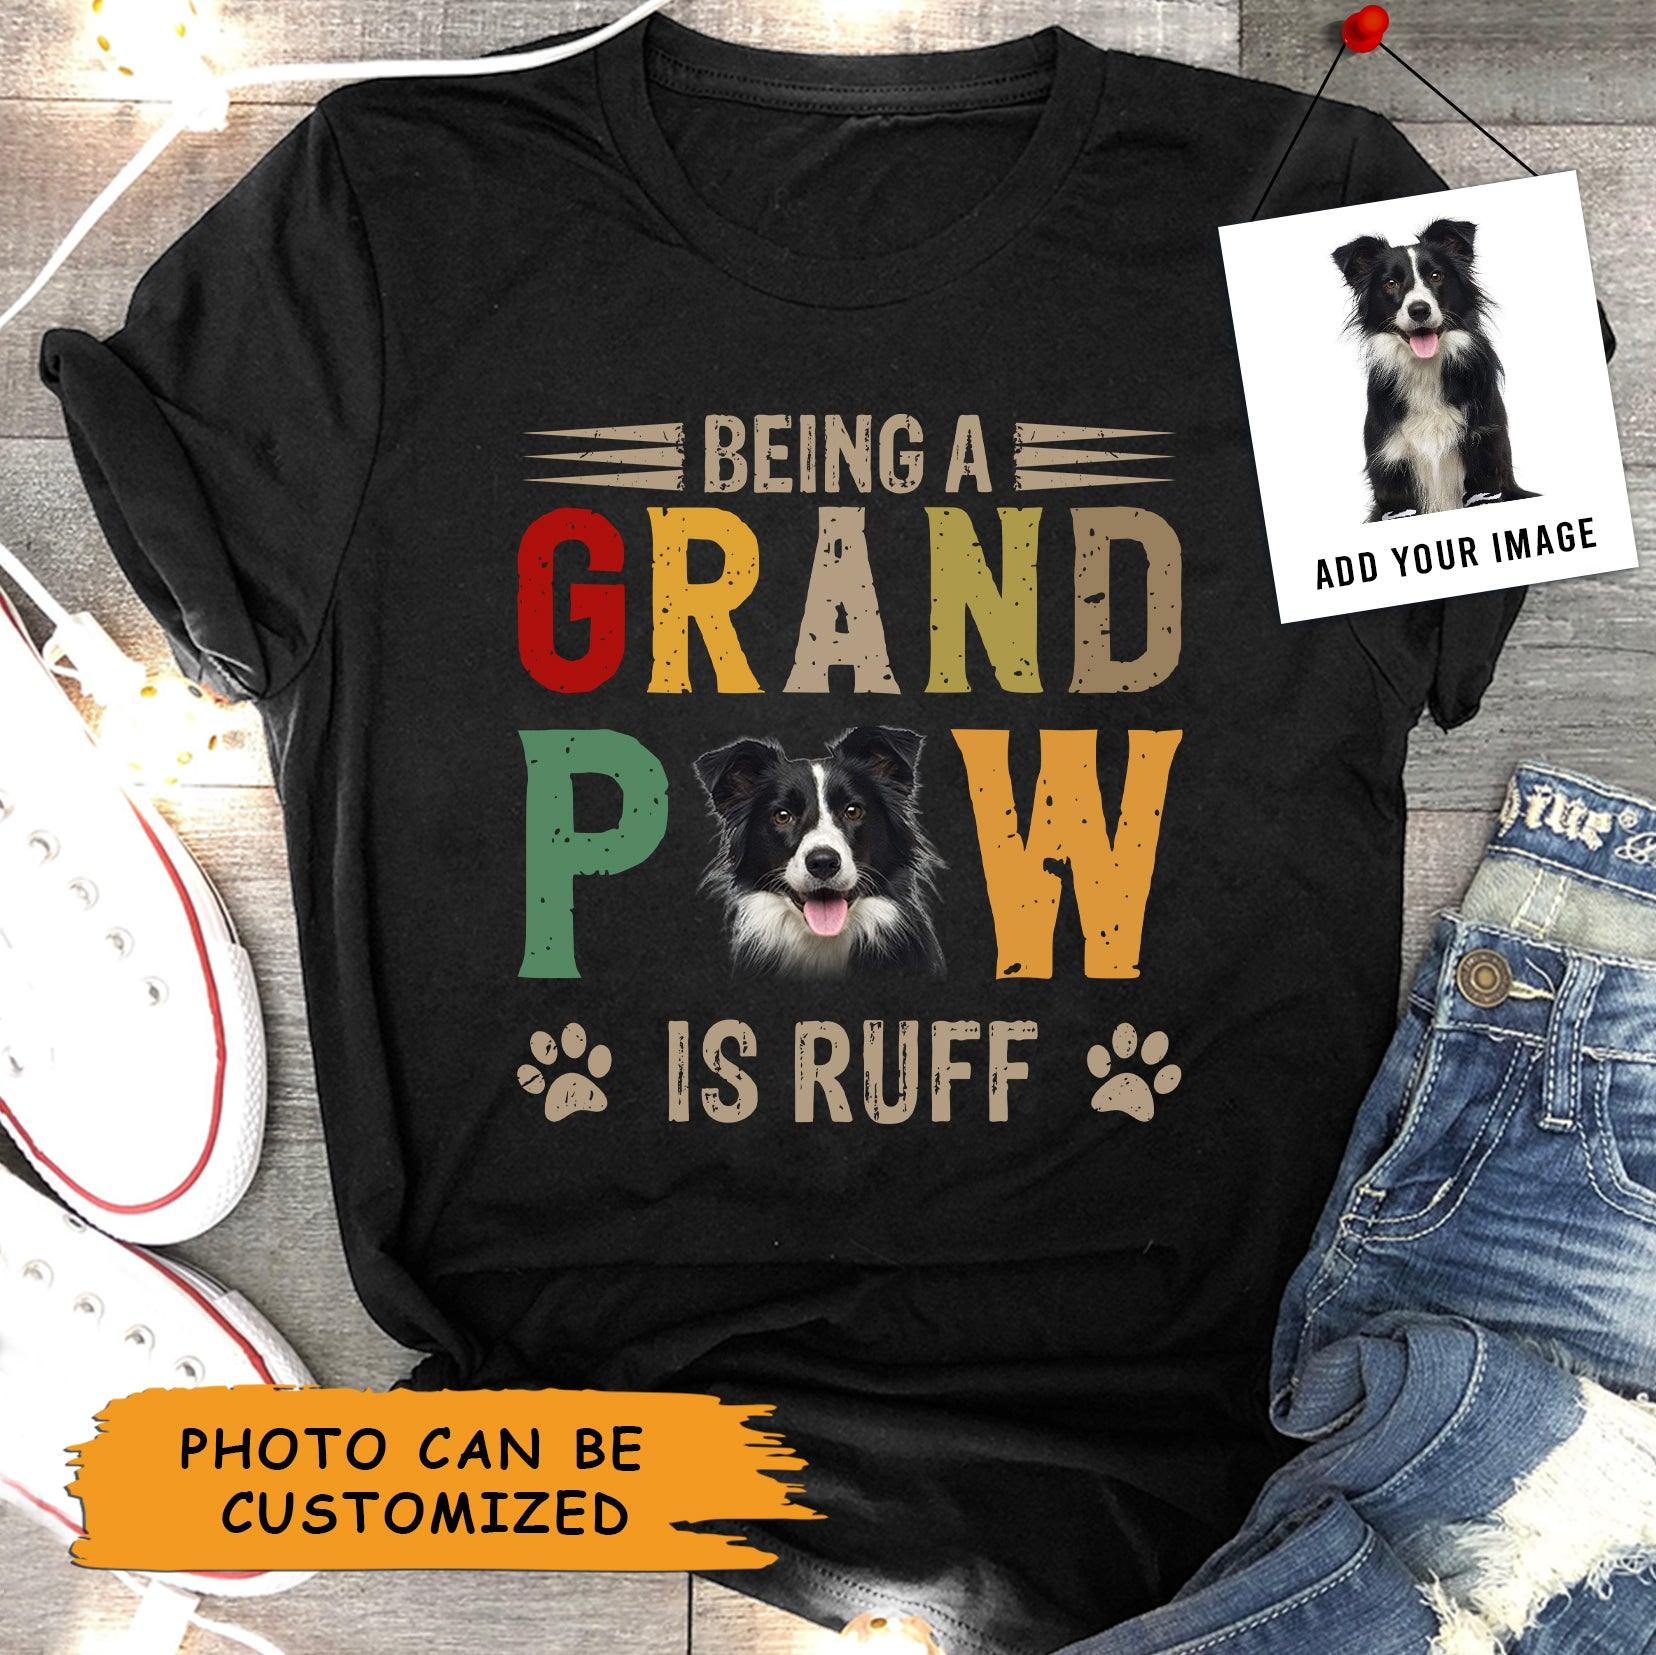 Border Collie Dog Unisex T Shirt Custom - Customize Photo Being A Grand Paw Is Ruff Personalized Unisex T Shirt - Gift For Dog Lovers, Friend, Family - Amzanimalsgift